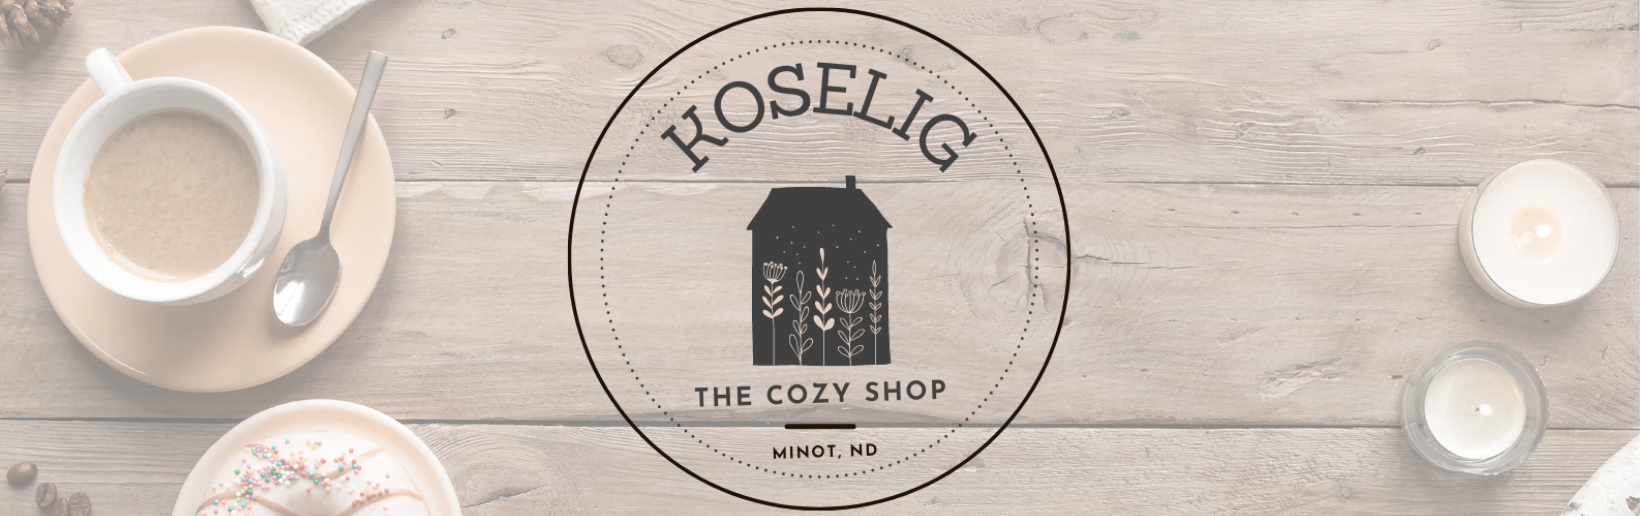 Koselig the Cozy Shop - Downtown Minot ND